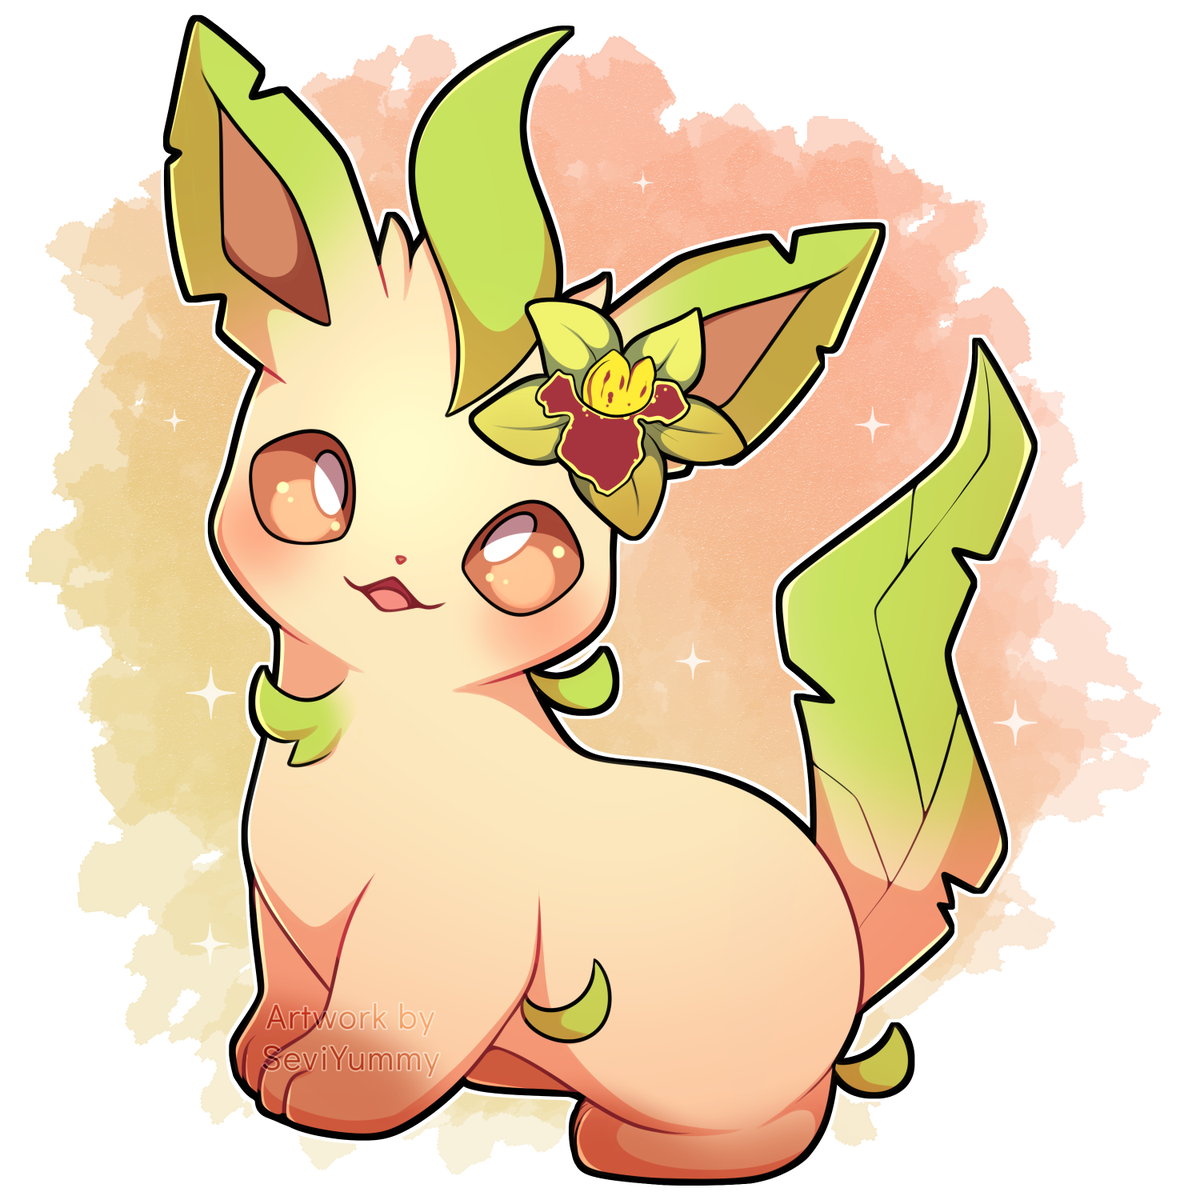 Baby Leafeon Commission for the lovely Pingoddess on Instagram! 